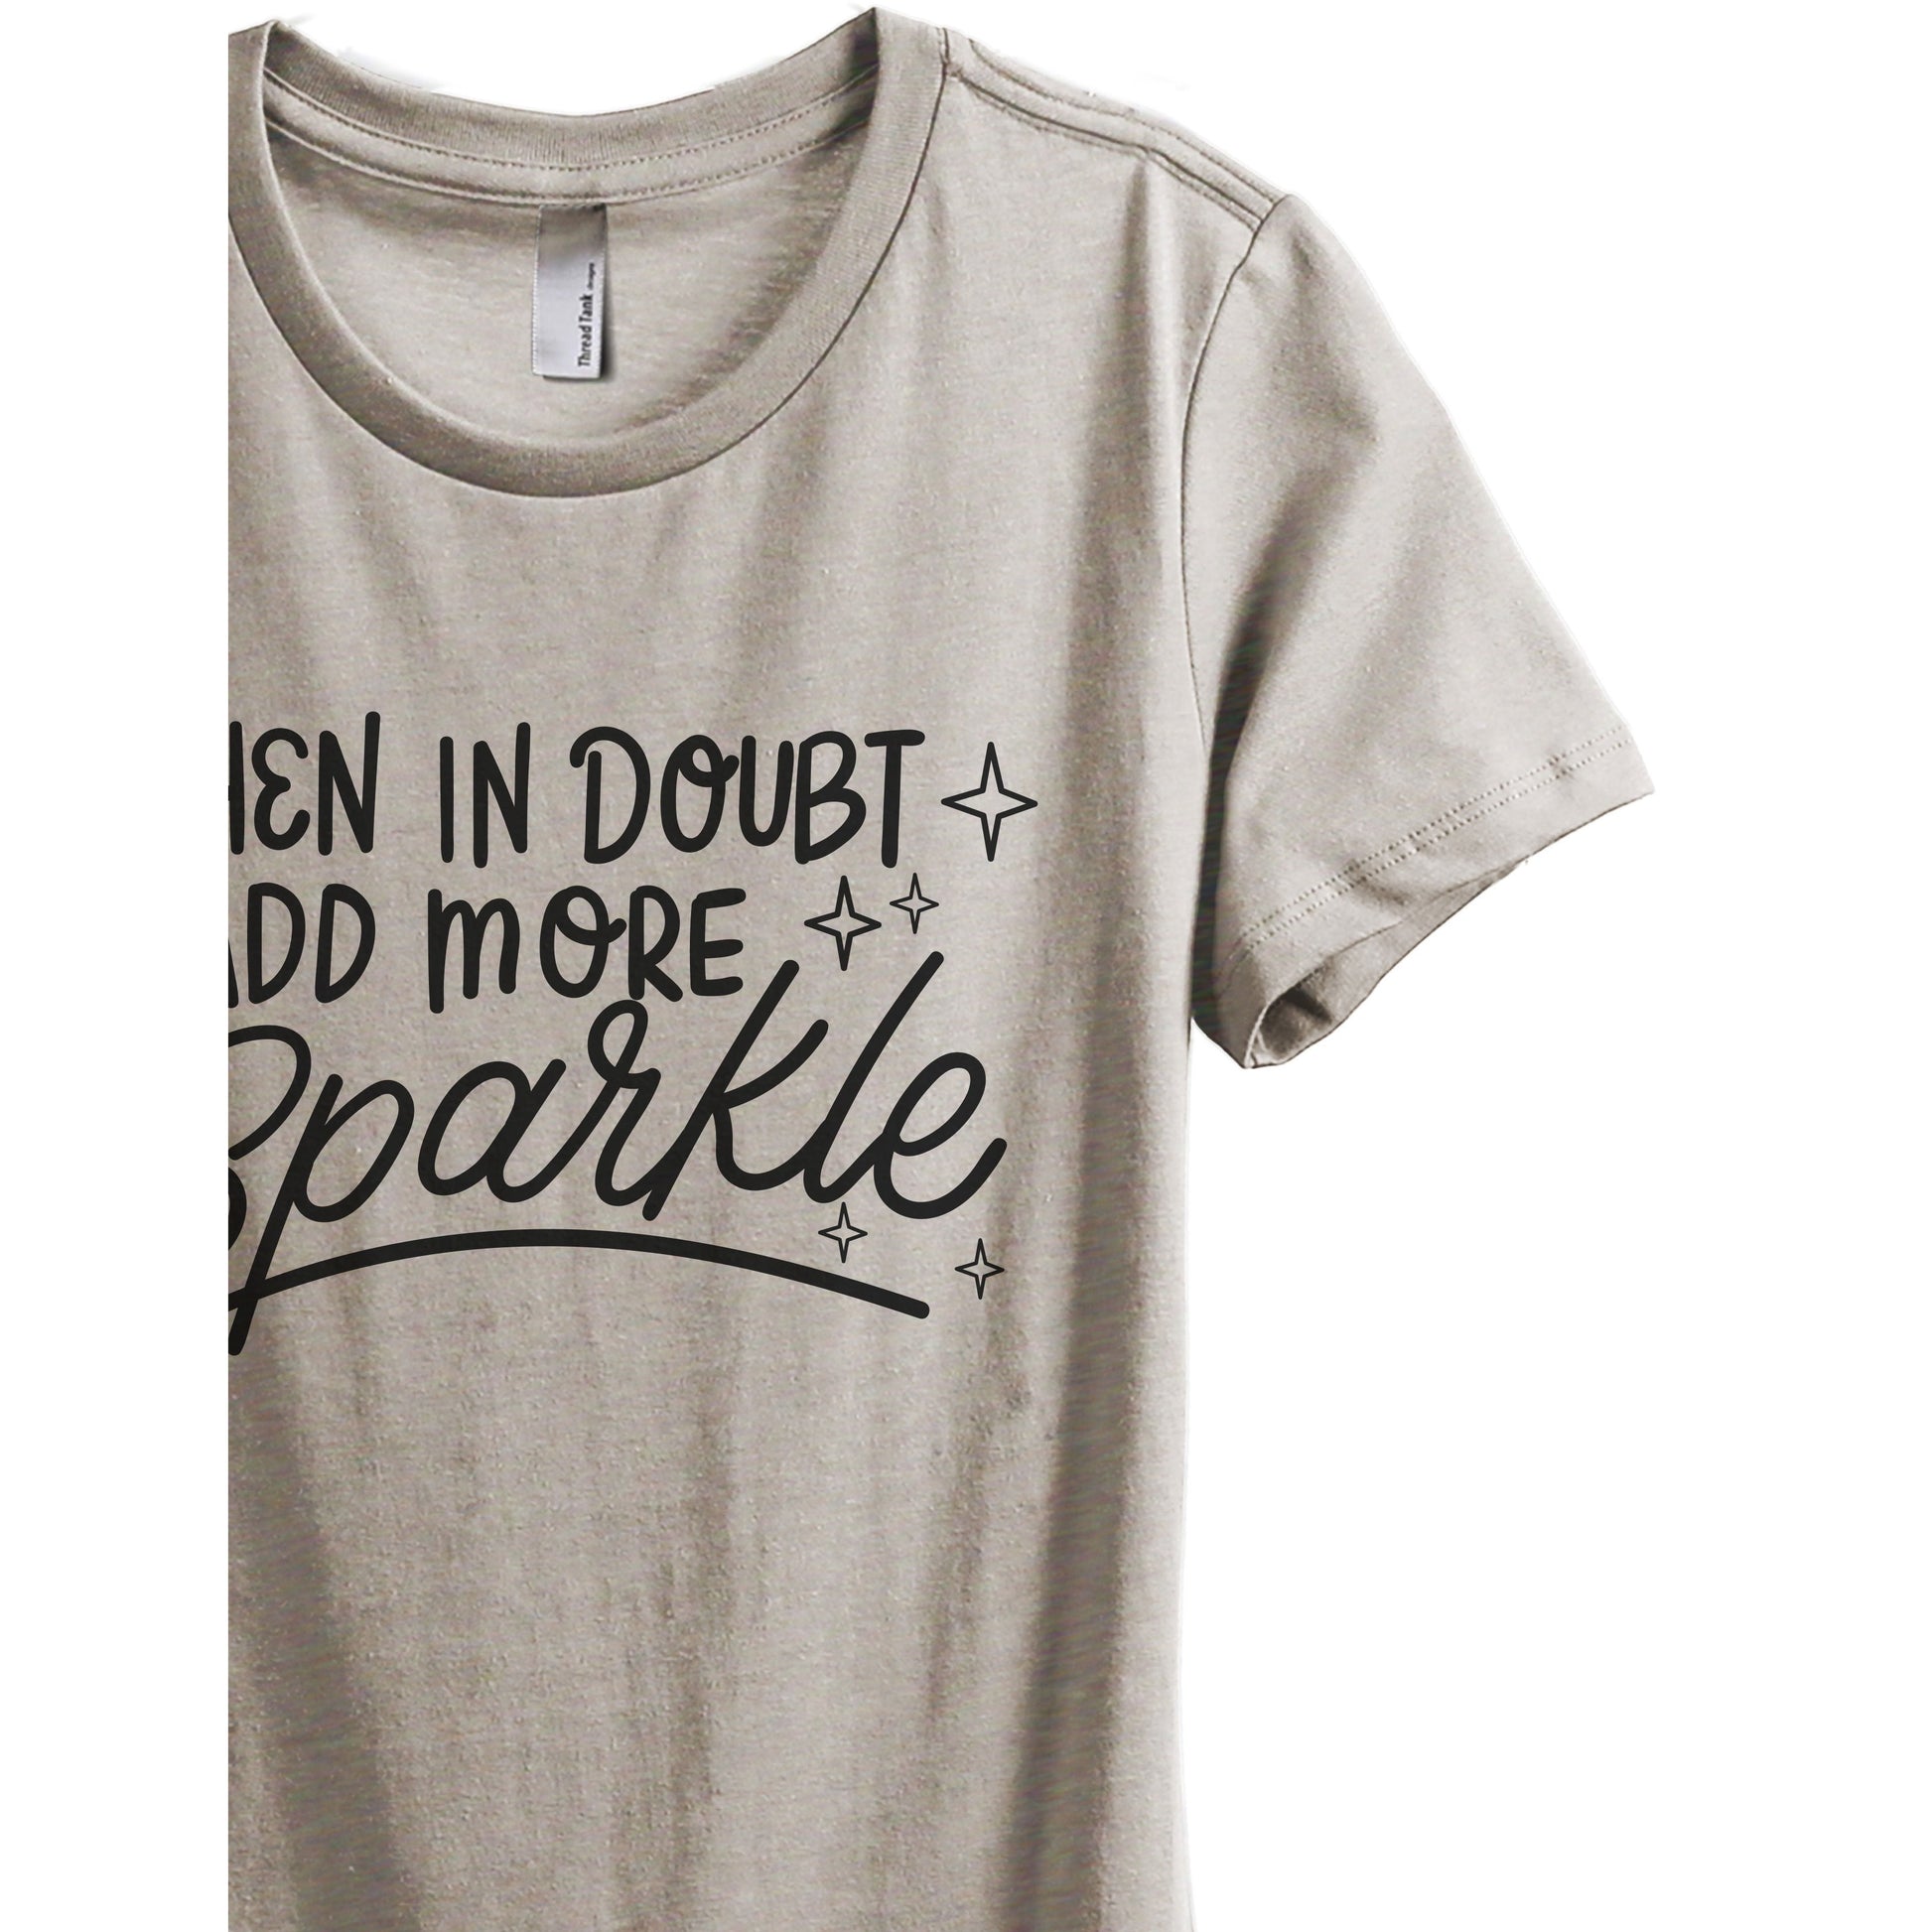 When In Doubt, Add More Diamonds Or Sparkle - Stories You Can Wear by Thread Tank